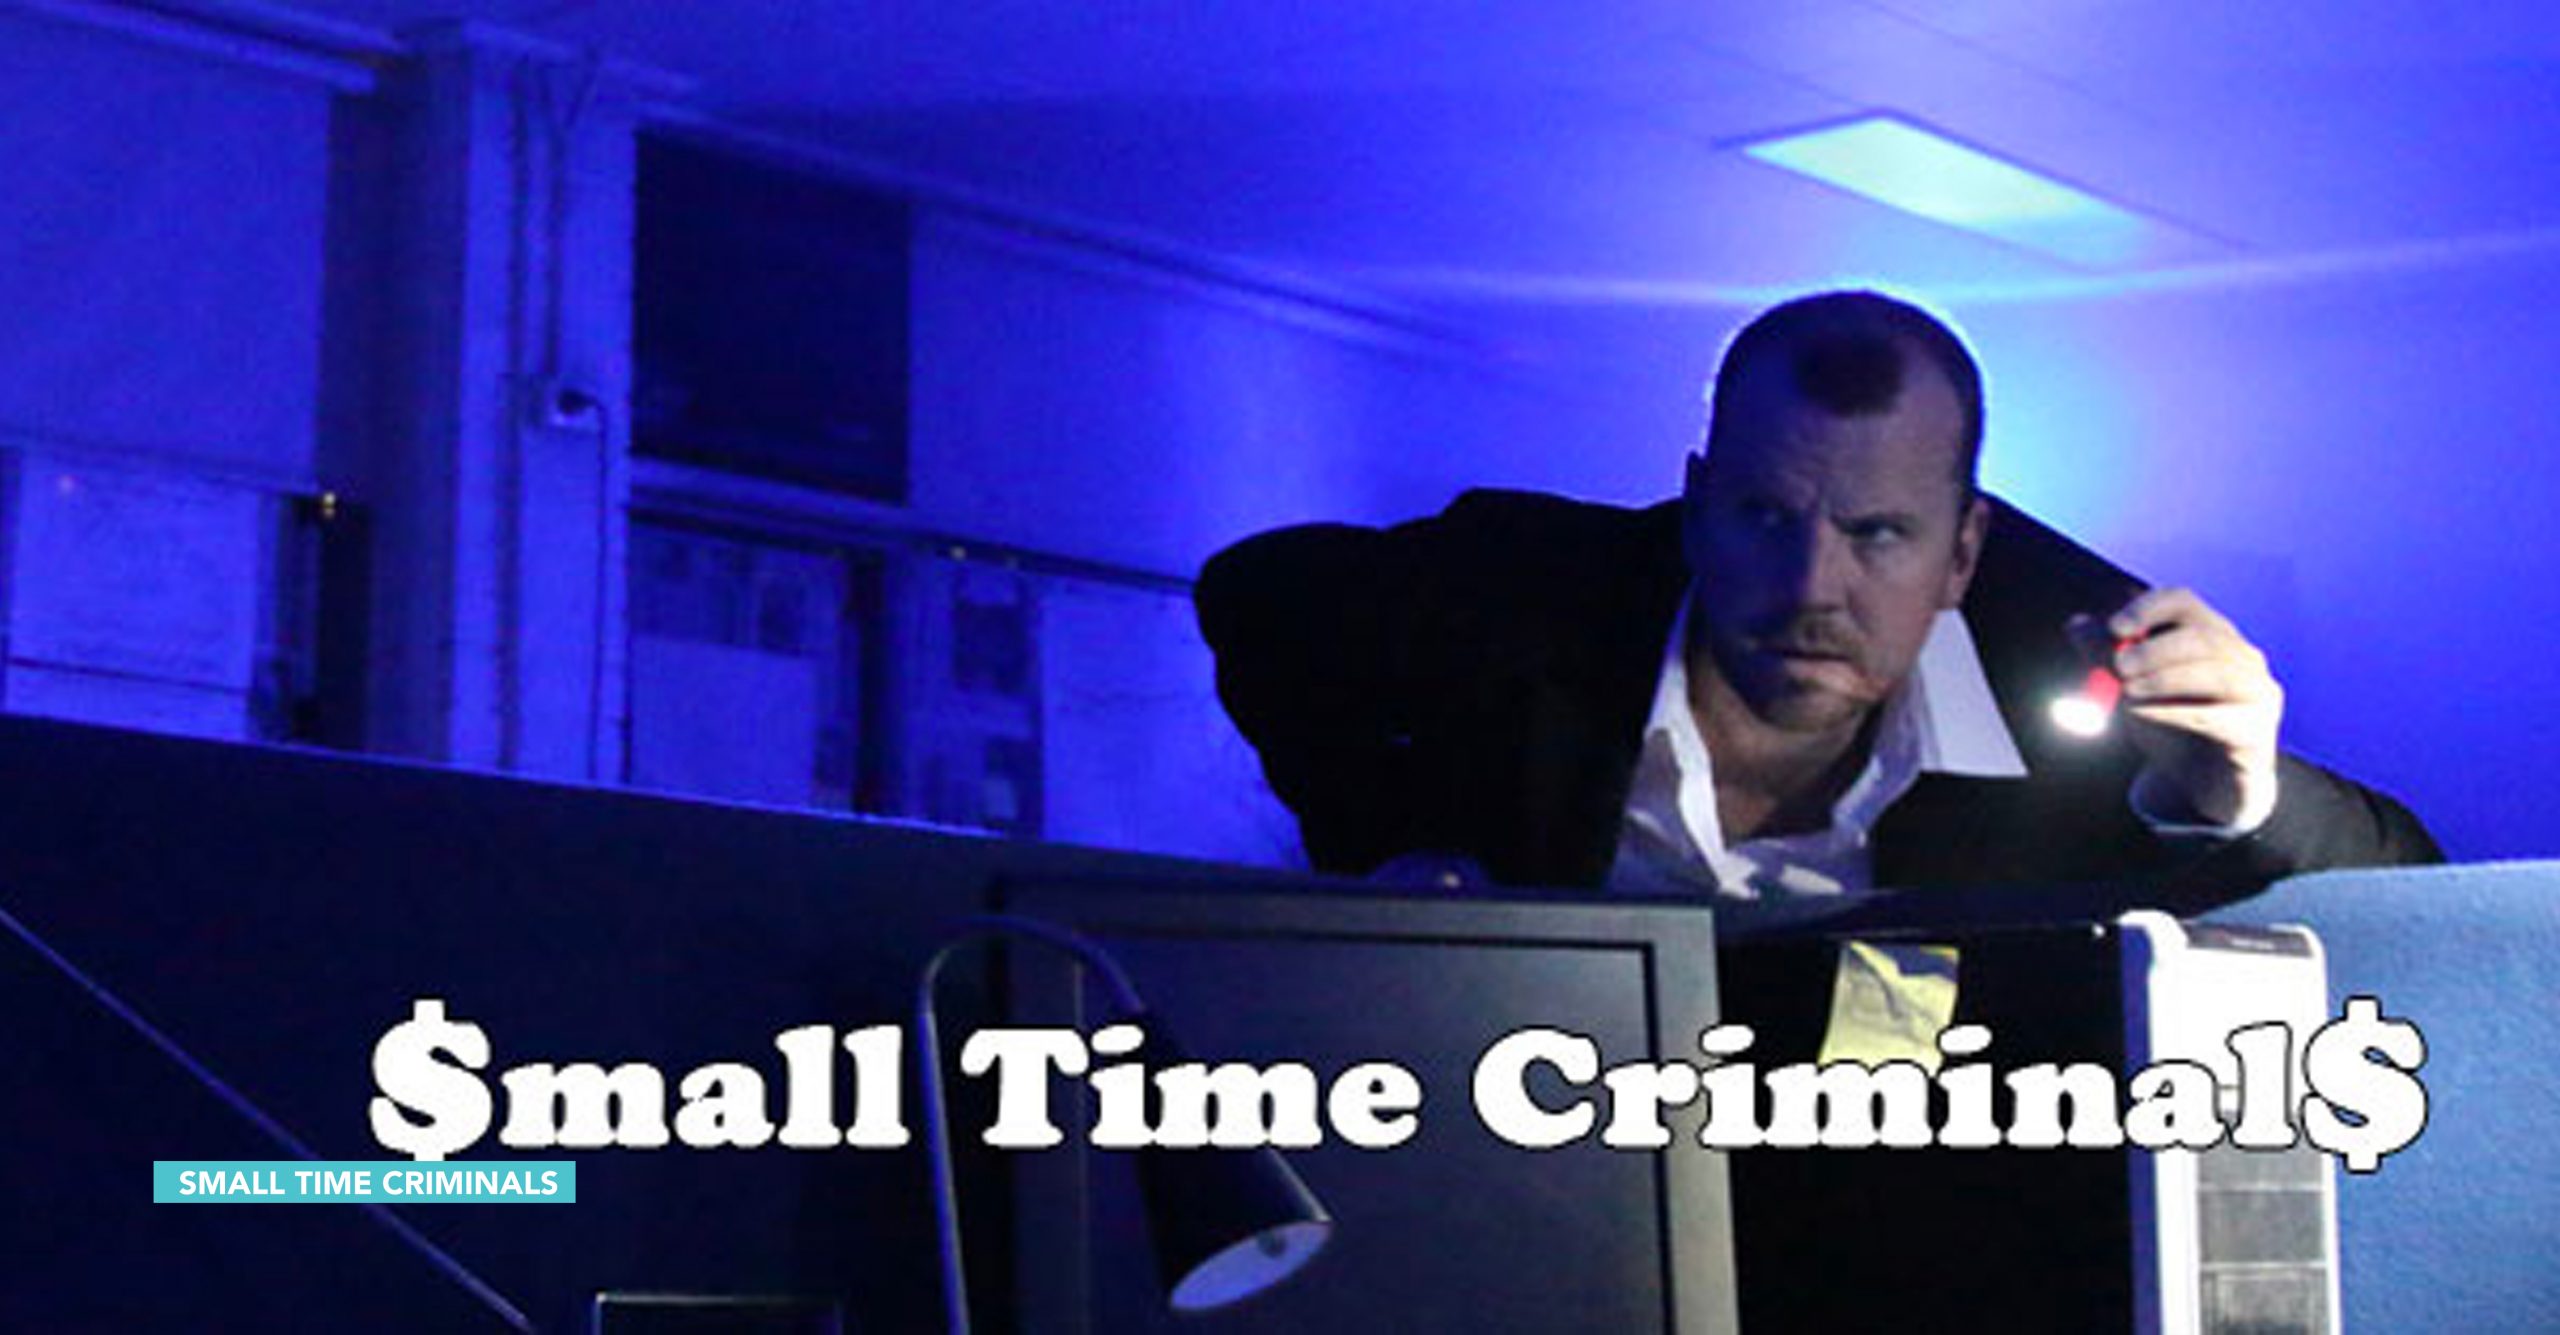 Solve the mystery at Small Time Criminals